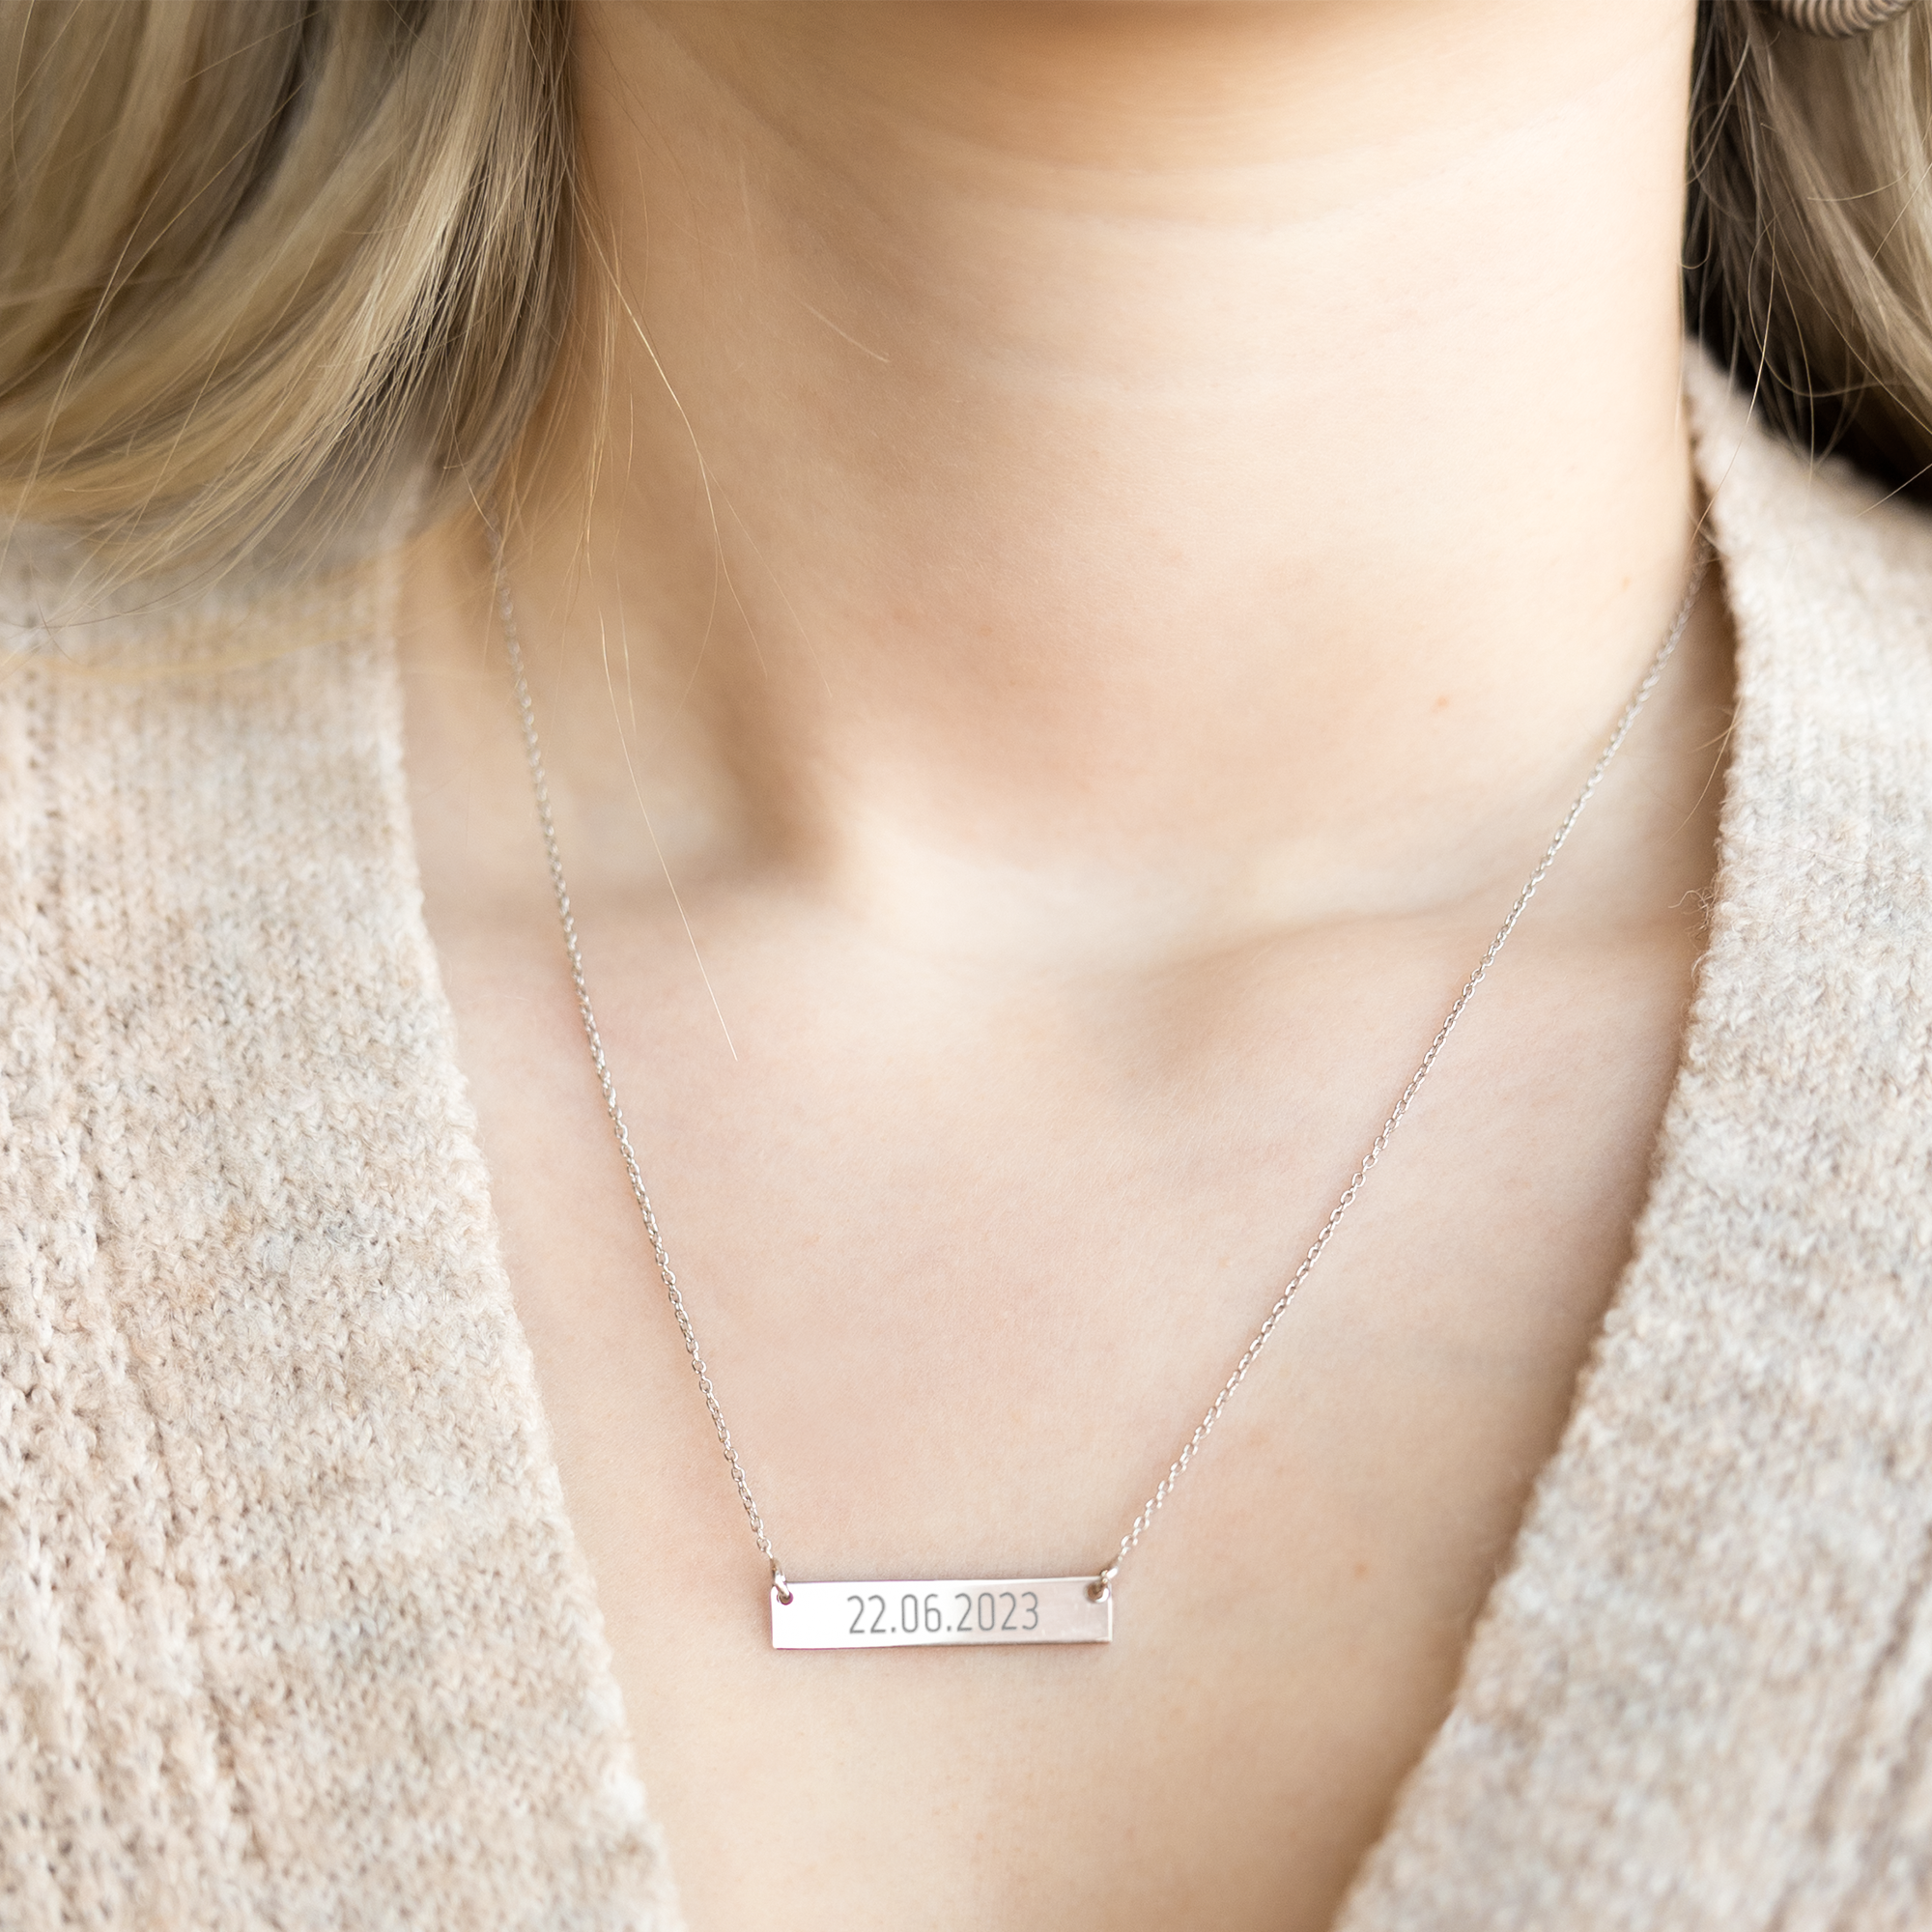 ENGRAVABLE BAR NECKLACE (STERLING SILVER) – KIRSTIN ASH (United States)